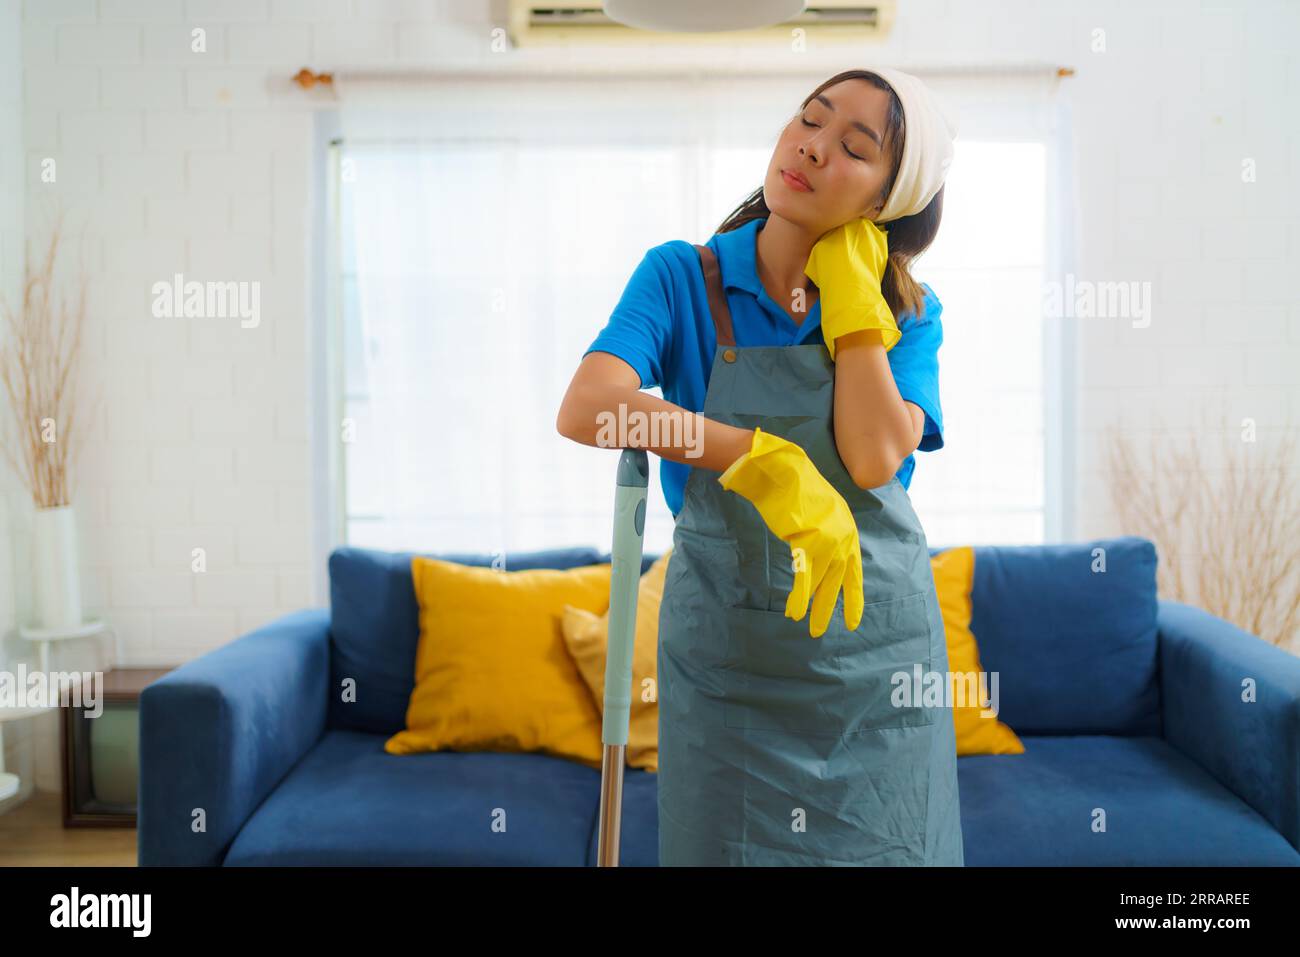 Determined Asian maid battles weariness, mop in hand. Every stroke tells a story of resilience and commitment in the pursuit of cleanliness. Stock Photo